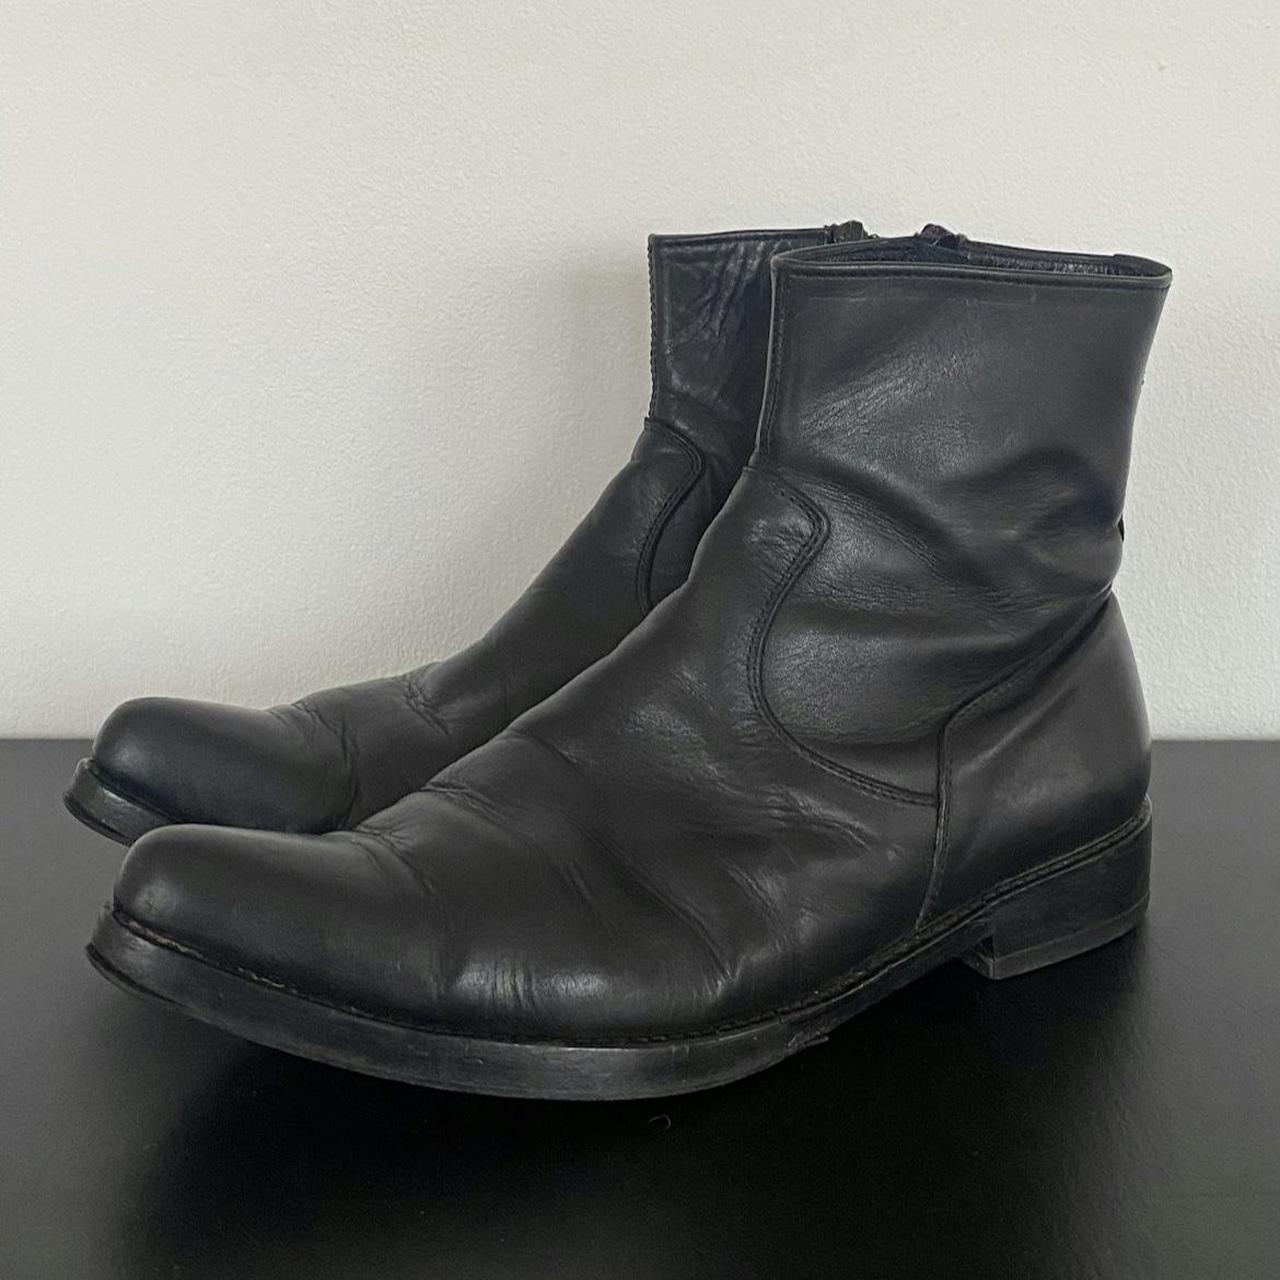 Yohji Yamamoto Femme Leather Boots Well-loved pair... - Depop